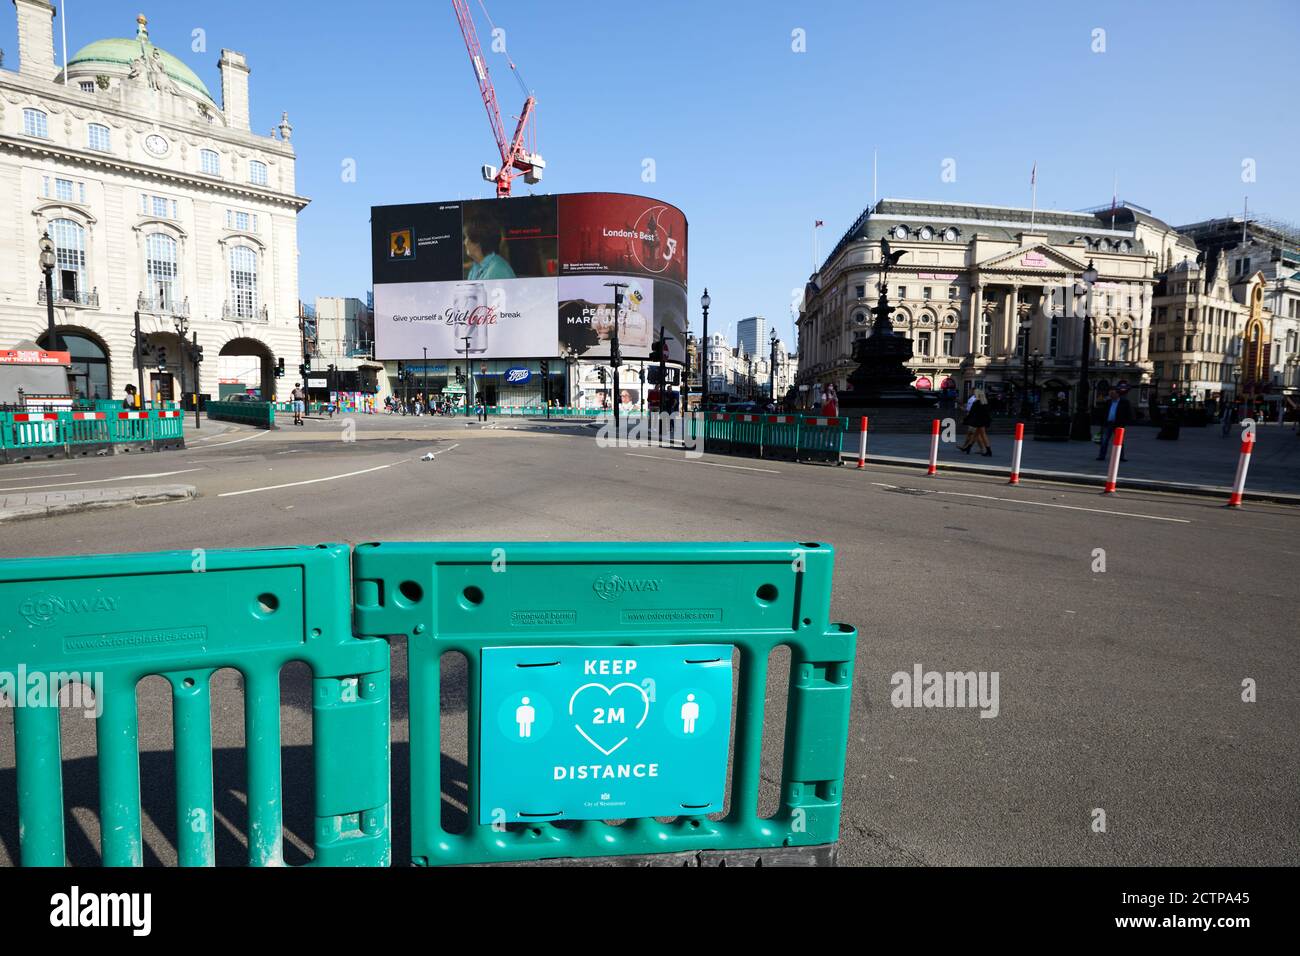 London, UK. - 20 Sept 2020: A sign - asking pedestrians to social distance - in front of an almost deserted Piccadilly Circus in the heart of London. Image taken on a weekday mid-morning when this area would normally be very busy. Stock Photo